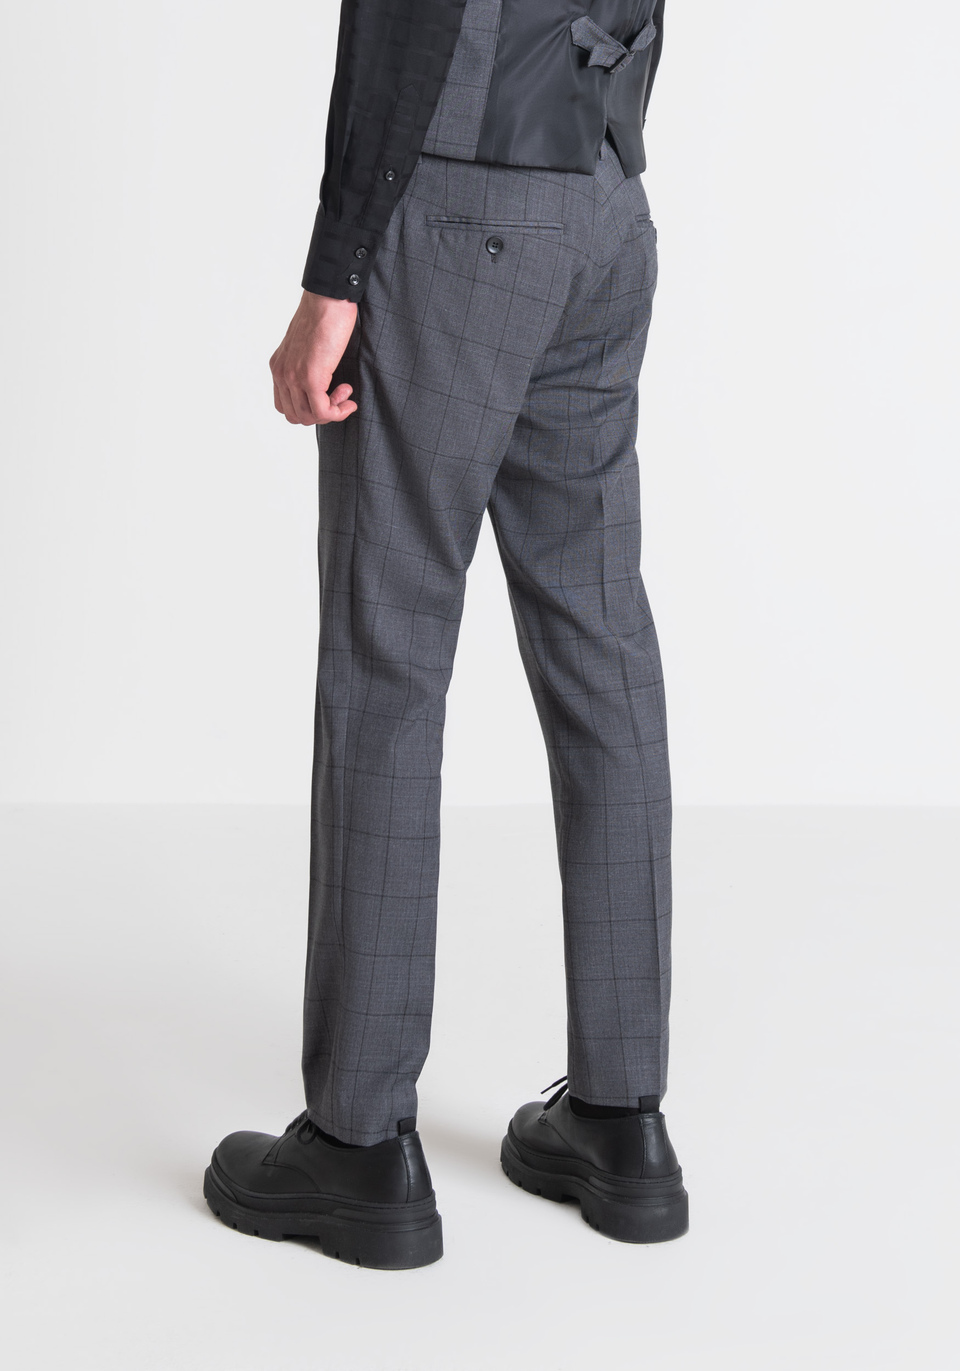 "BONNIE" SLIM FIT TROUSERS IN STRETCH VISCOSE AND WOOL BLEND FABRIC - Antony Morato Online Shop